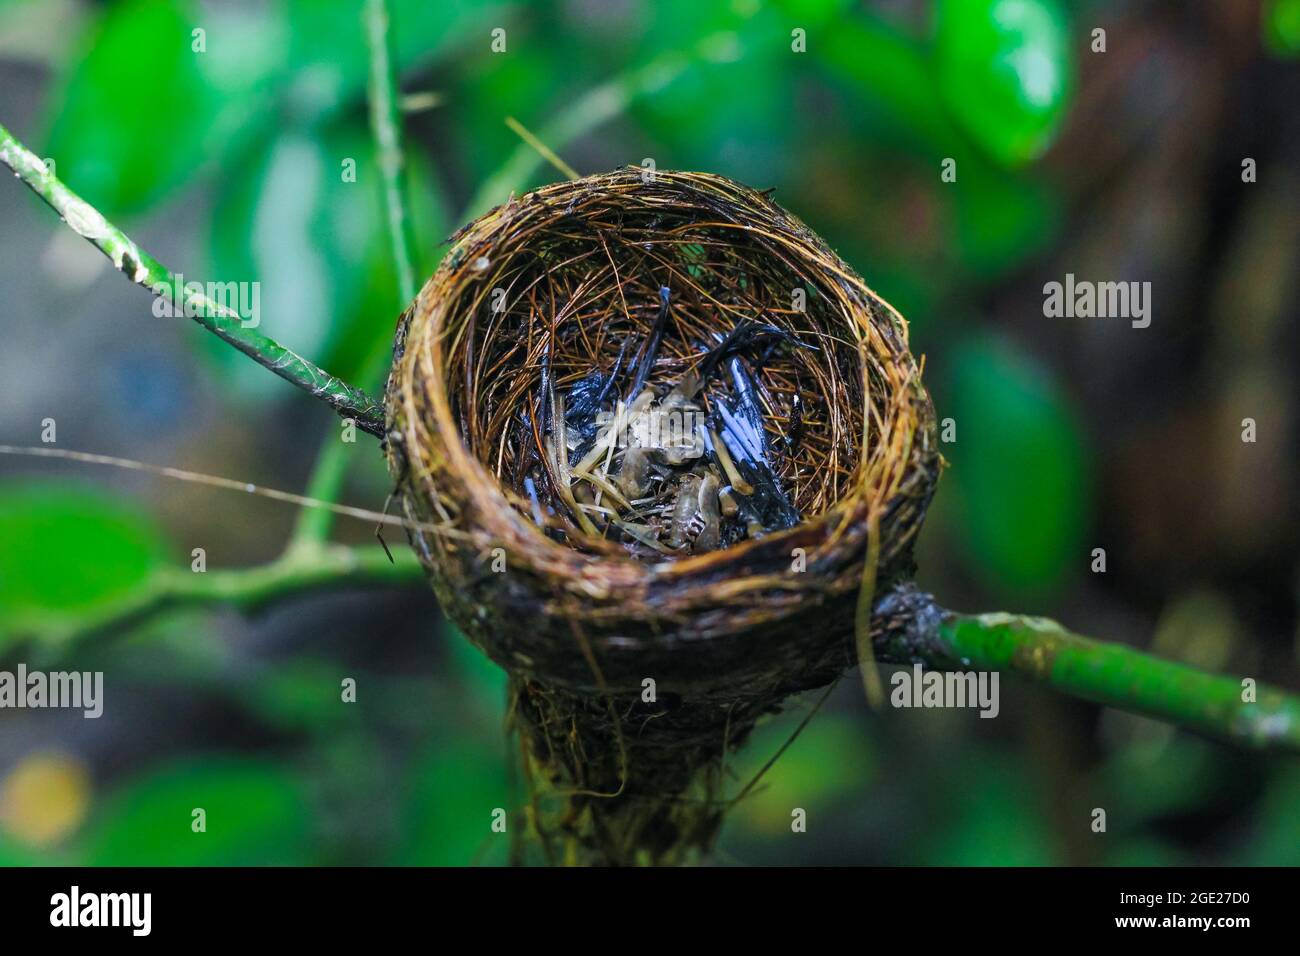 The remains of the baby bird died inside its nest. The concept of saves the bird. Stock Photo